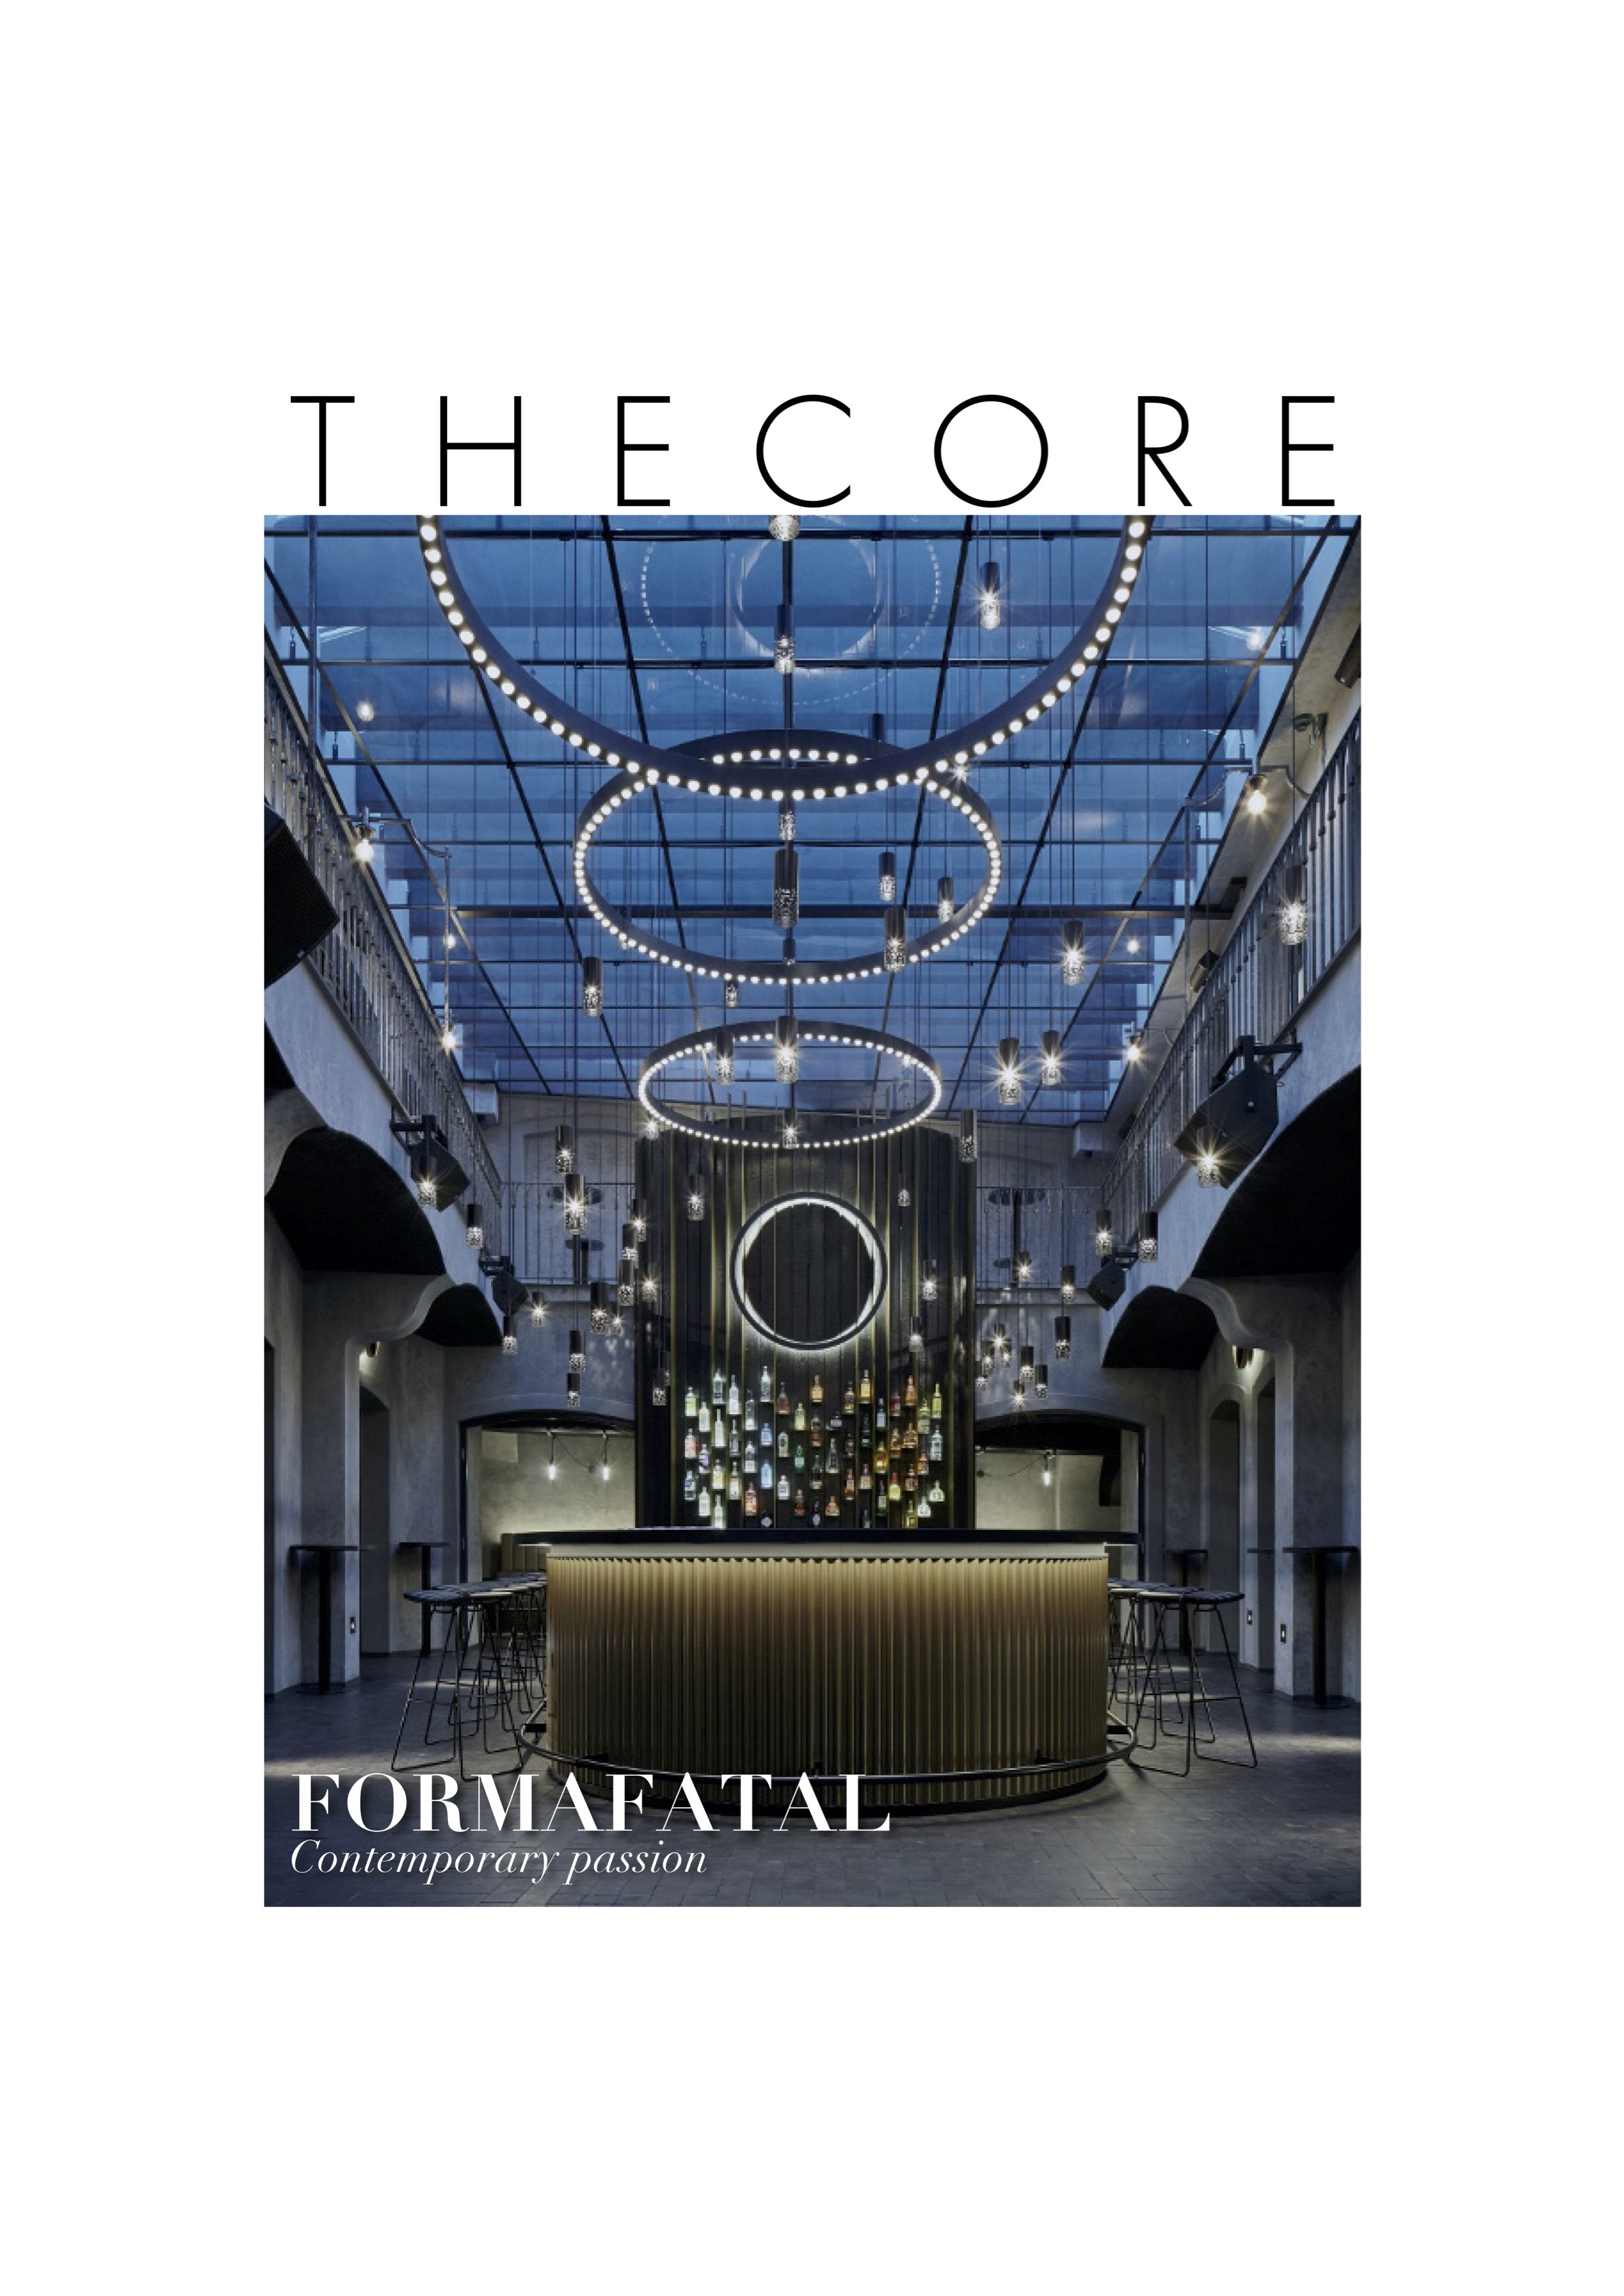 THECORE - FORMAFATAL